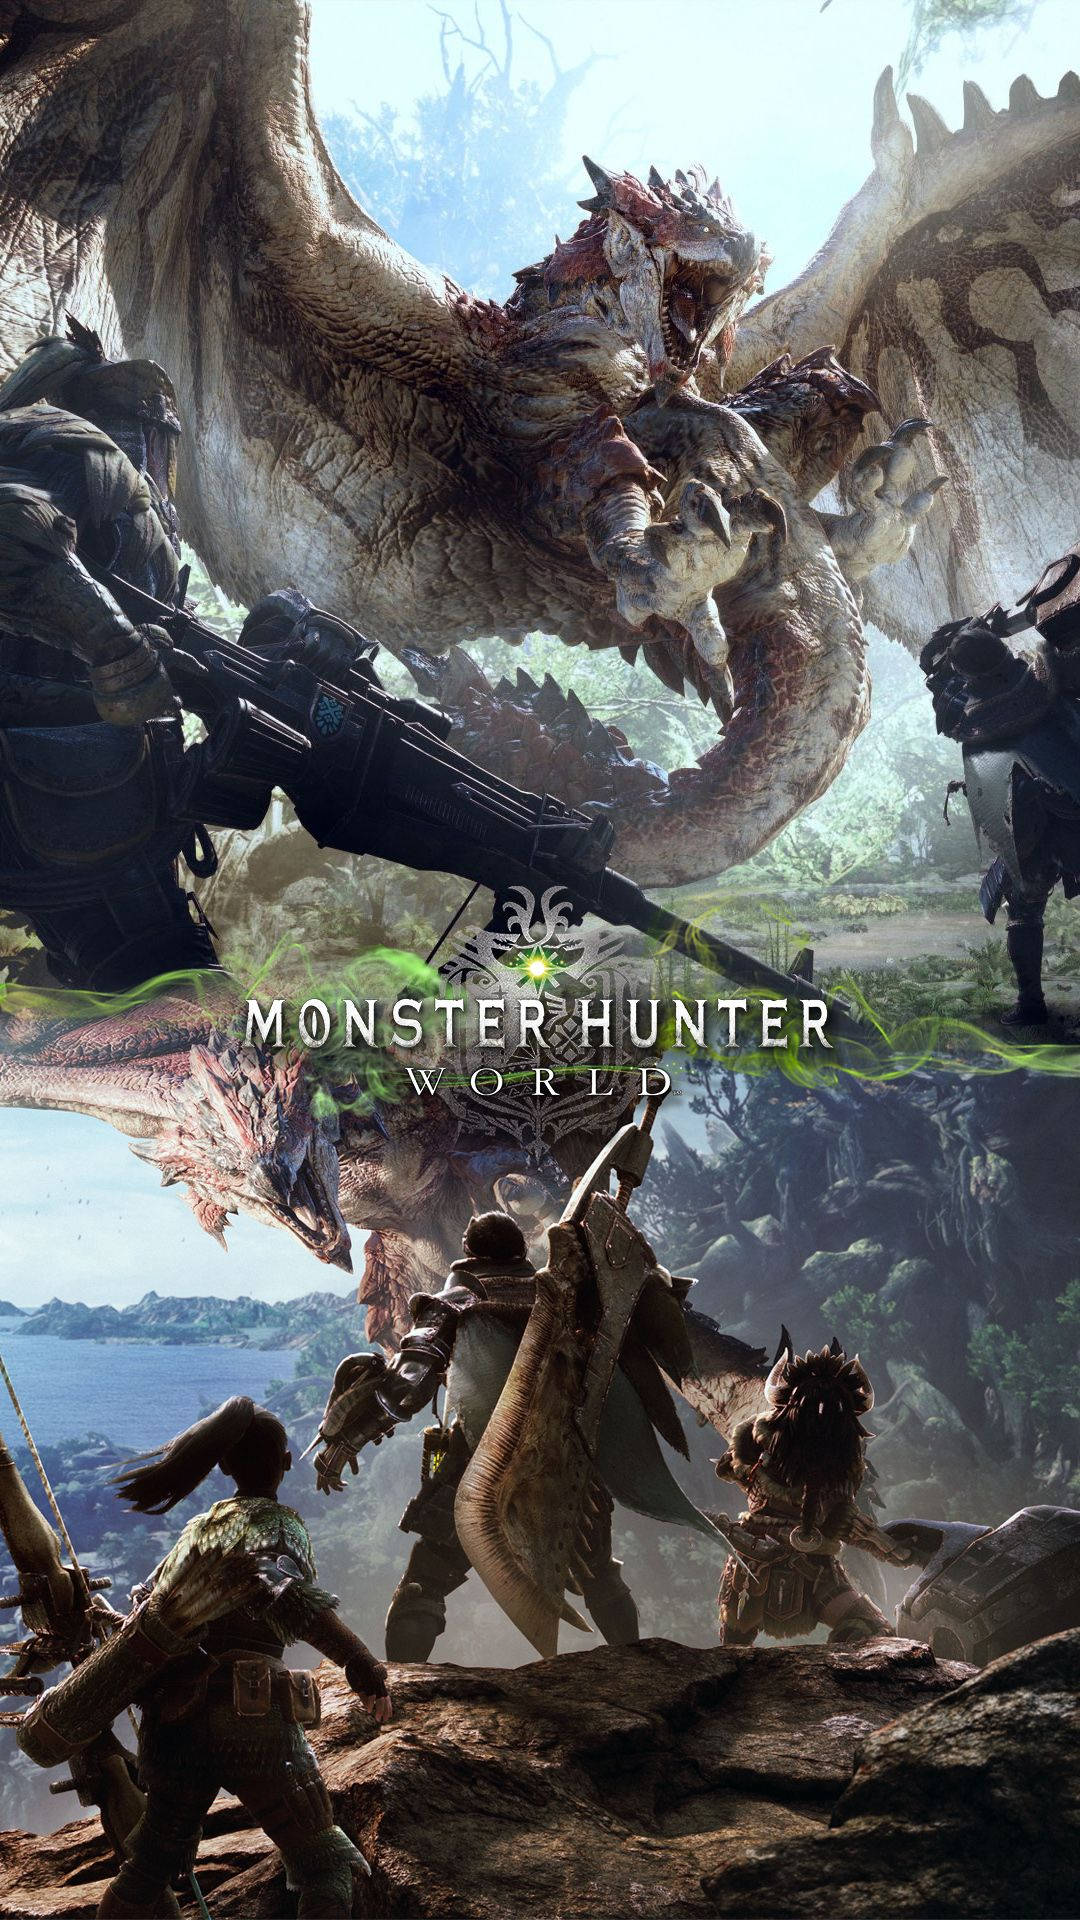 Wallpaper ID 317513  Video Game Monster Hunter Phone Wallpaper Battle  Dragon Rathalos Monster Hunter Warrior 1440x2960 free download